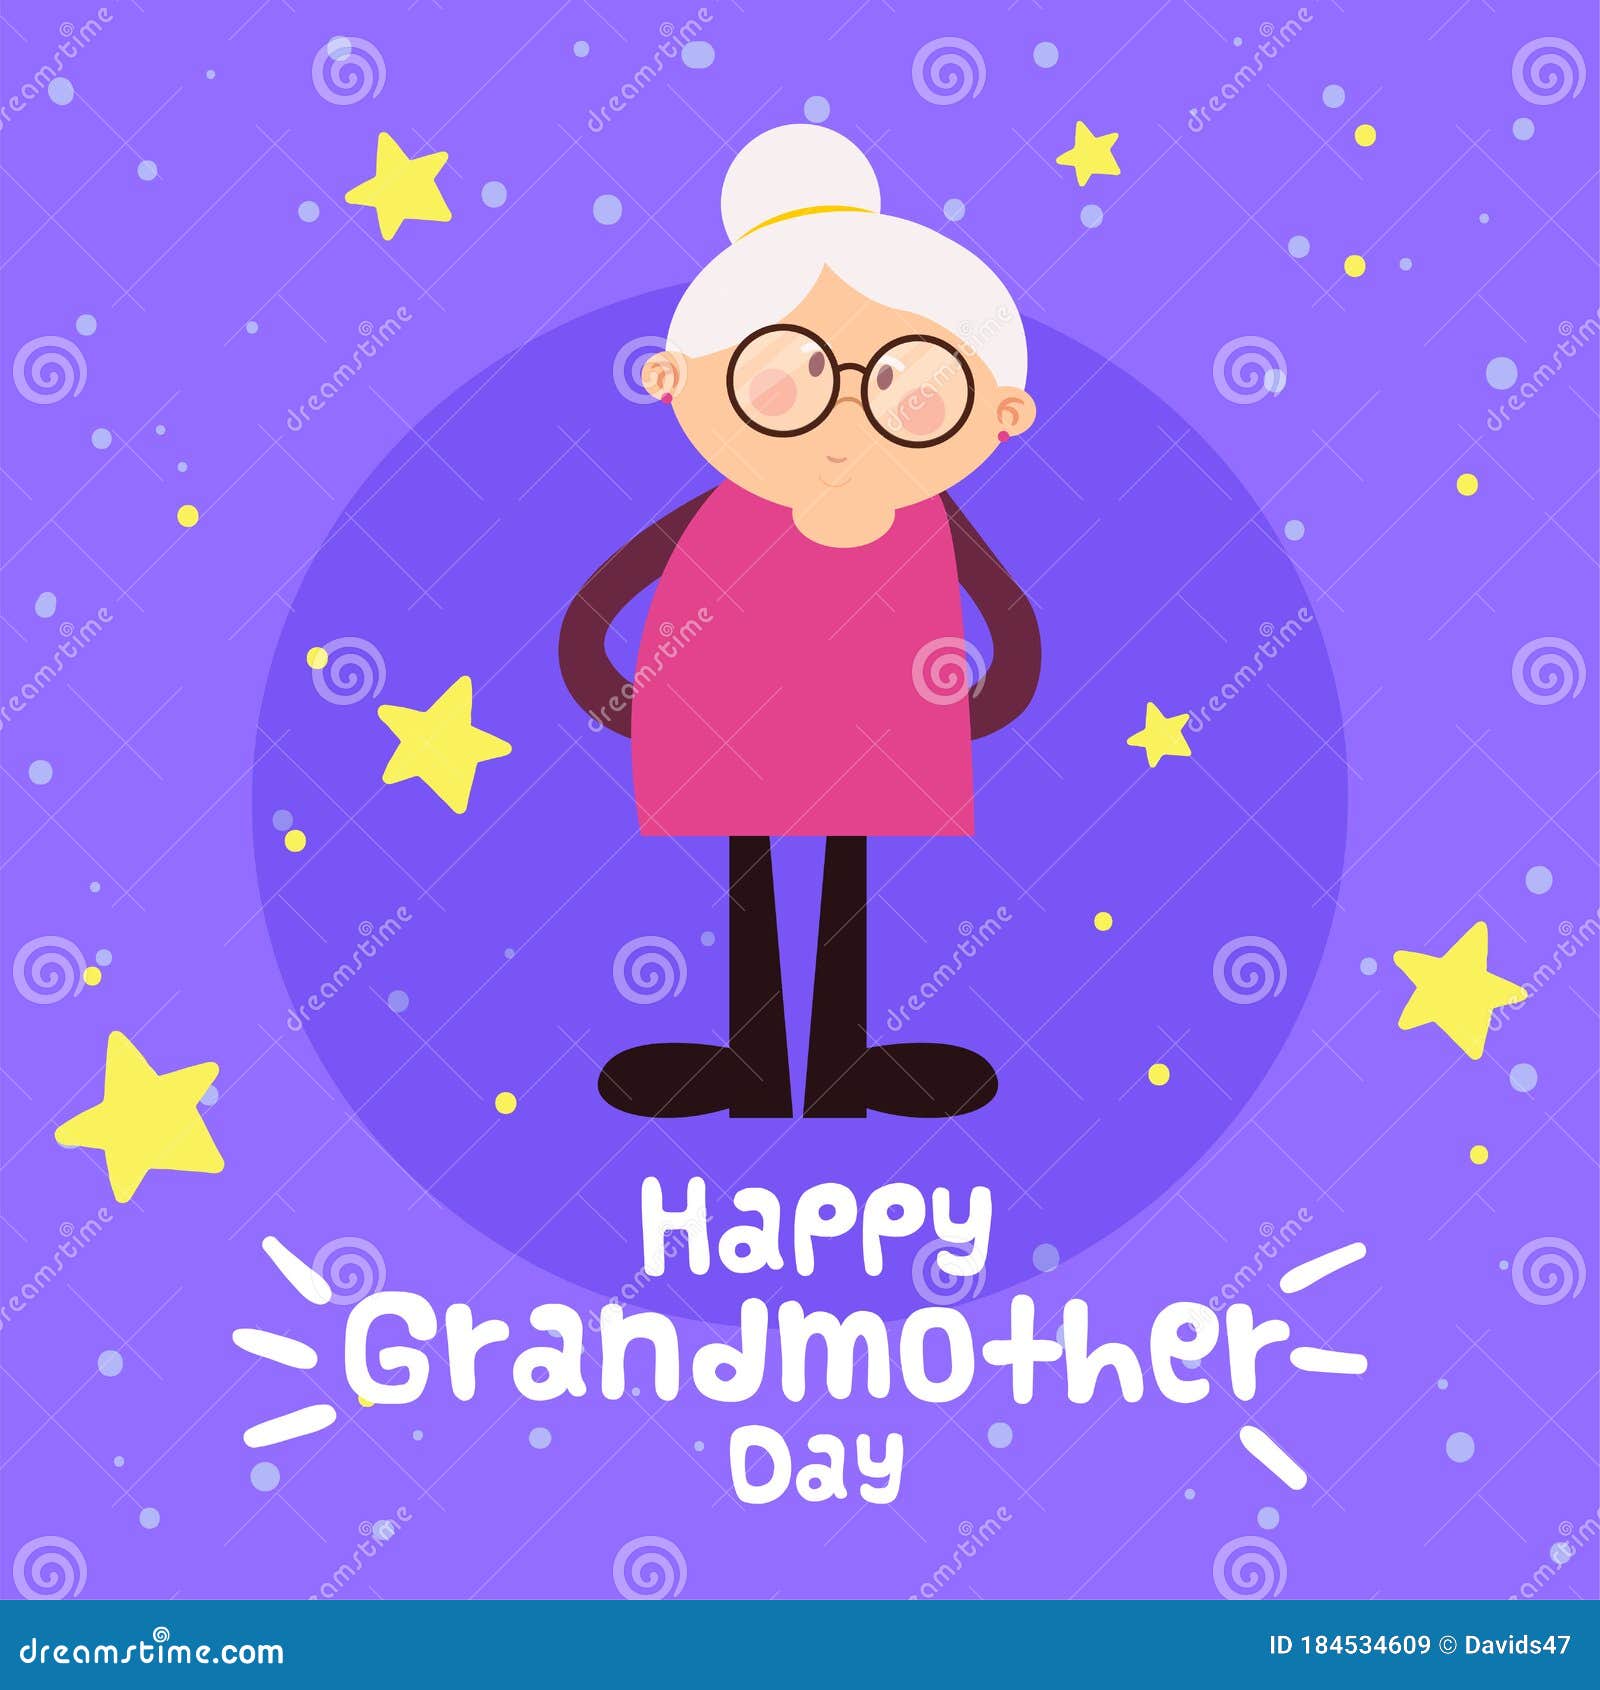 Happy Grandmothers Day Card Stock Vector Illustration of typography